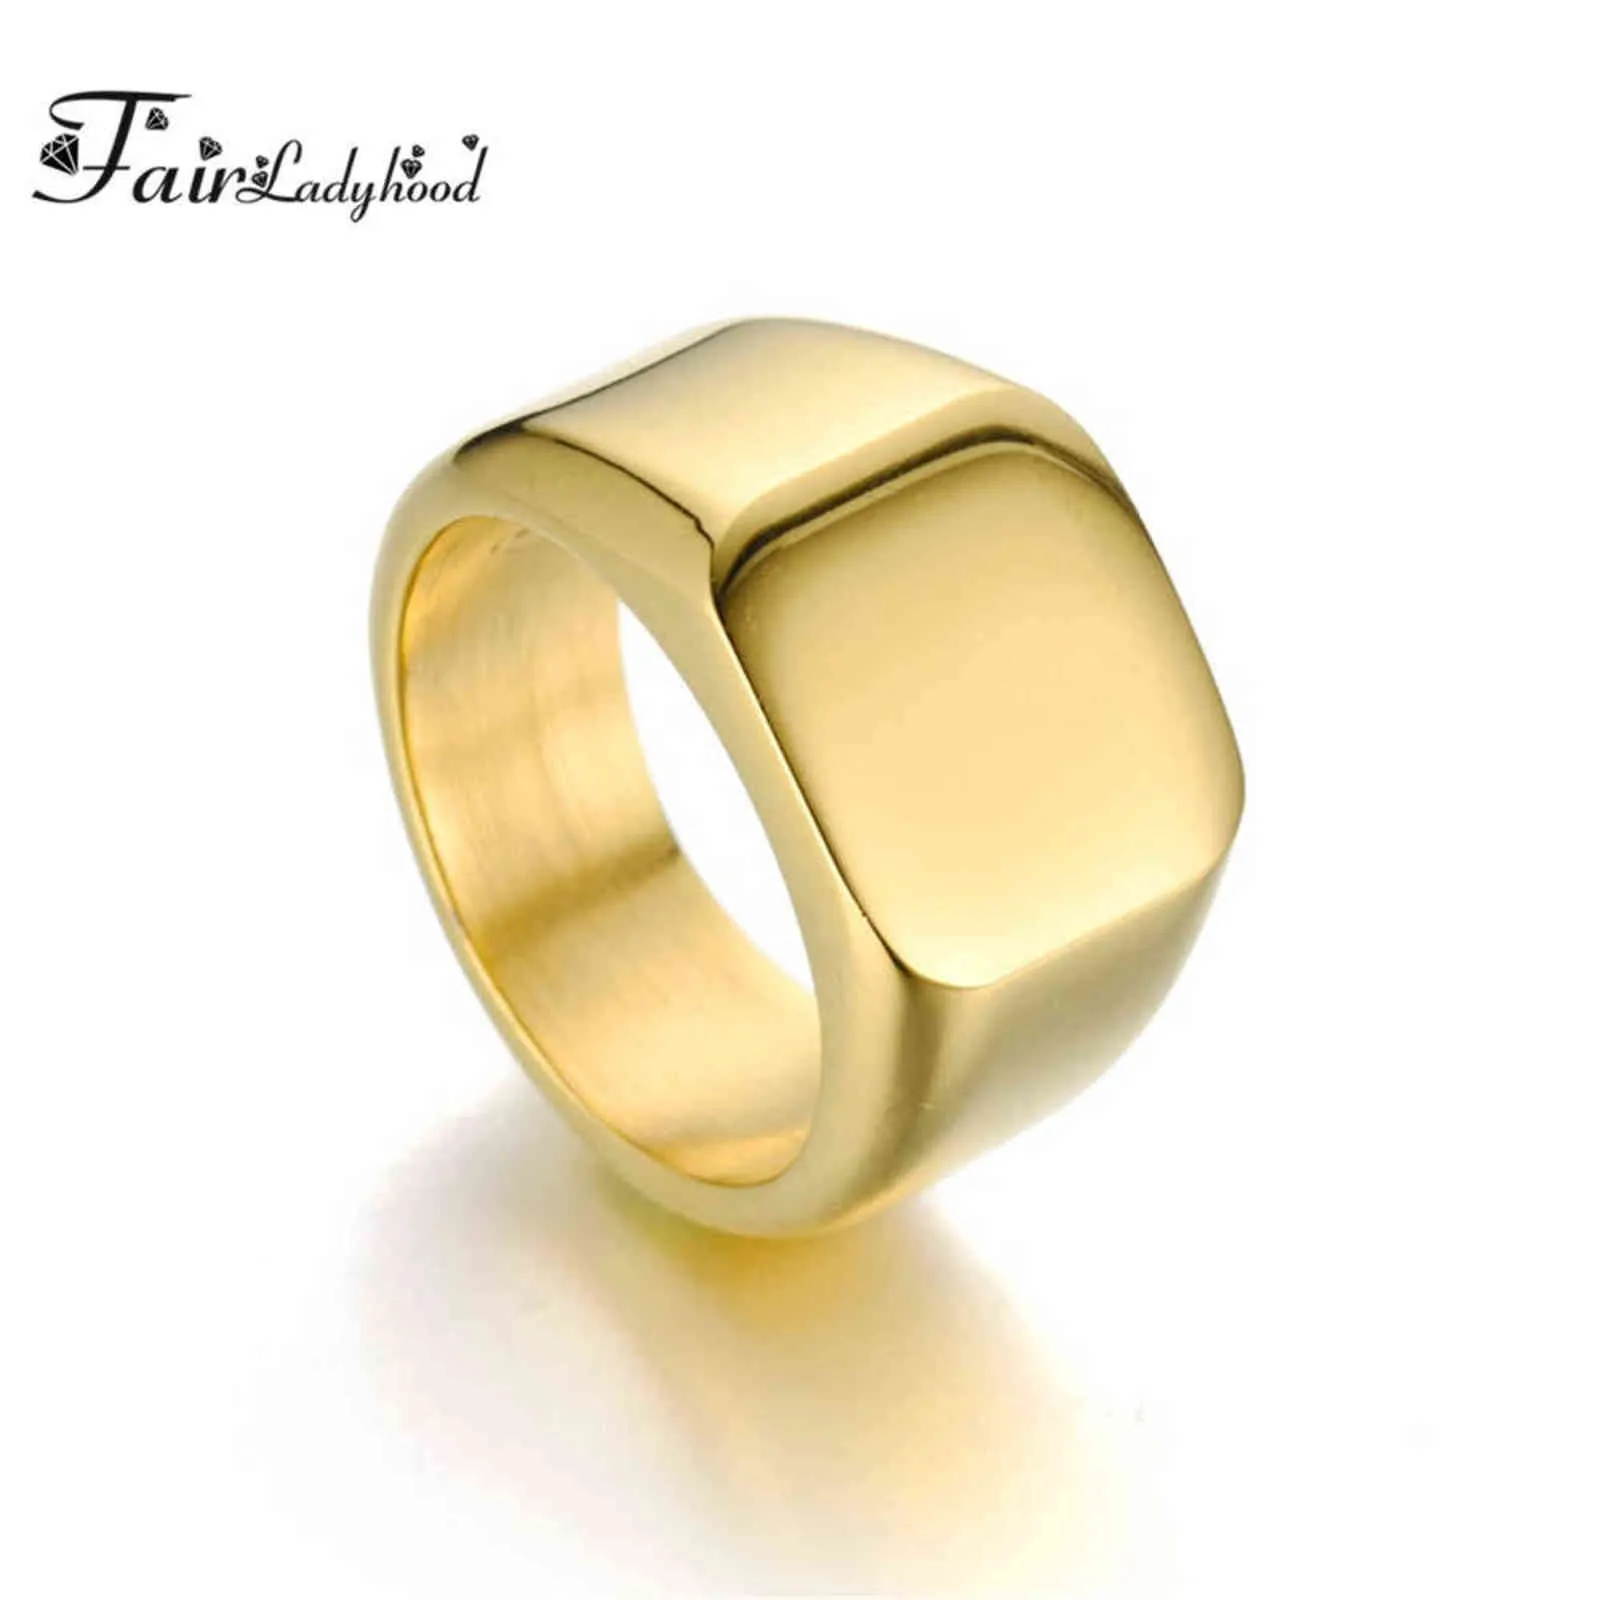 Fairladyhood Smooth Men's Black Rock Punk Anelli Cool Fashion Individuality Signet Ring donna Uomo Party Jewelry